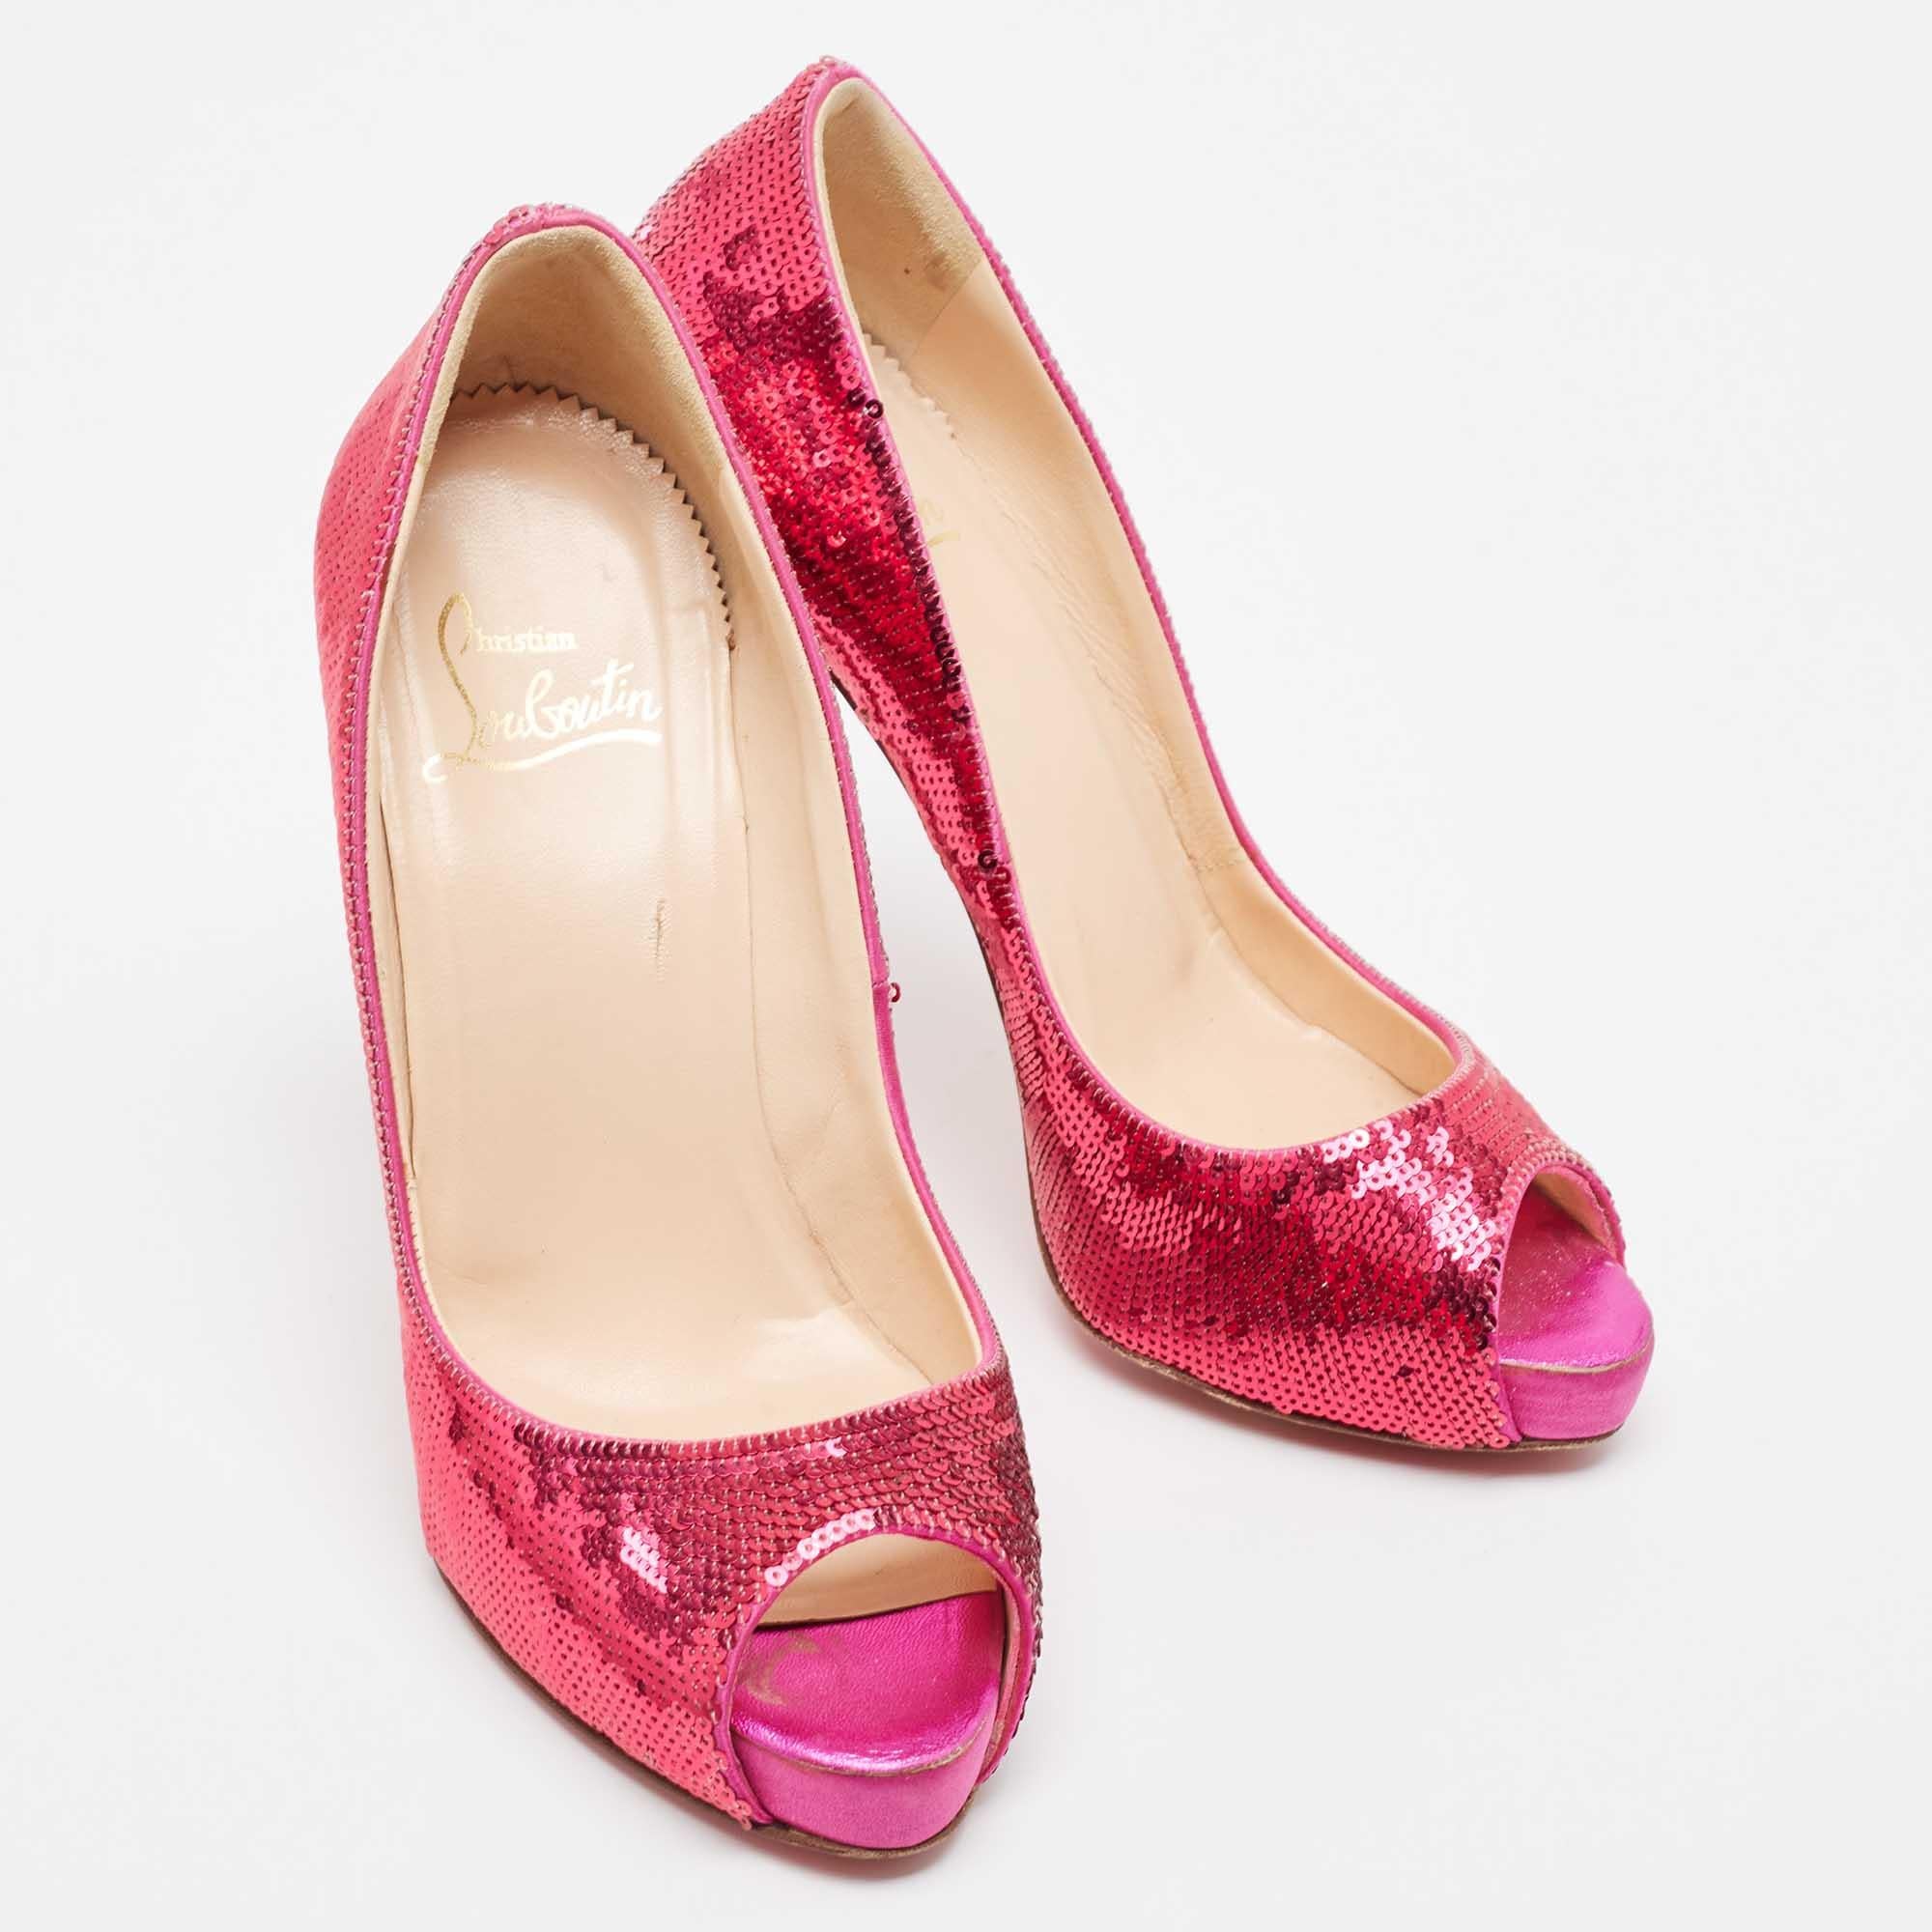 Christian Louboutin Pink Sequin Very Prive Pumps Size 37 In Good Condition For Sale In Dubai, Al Qouz 2